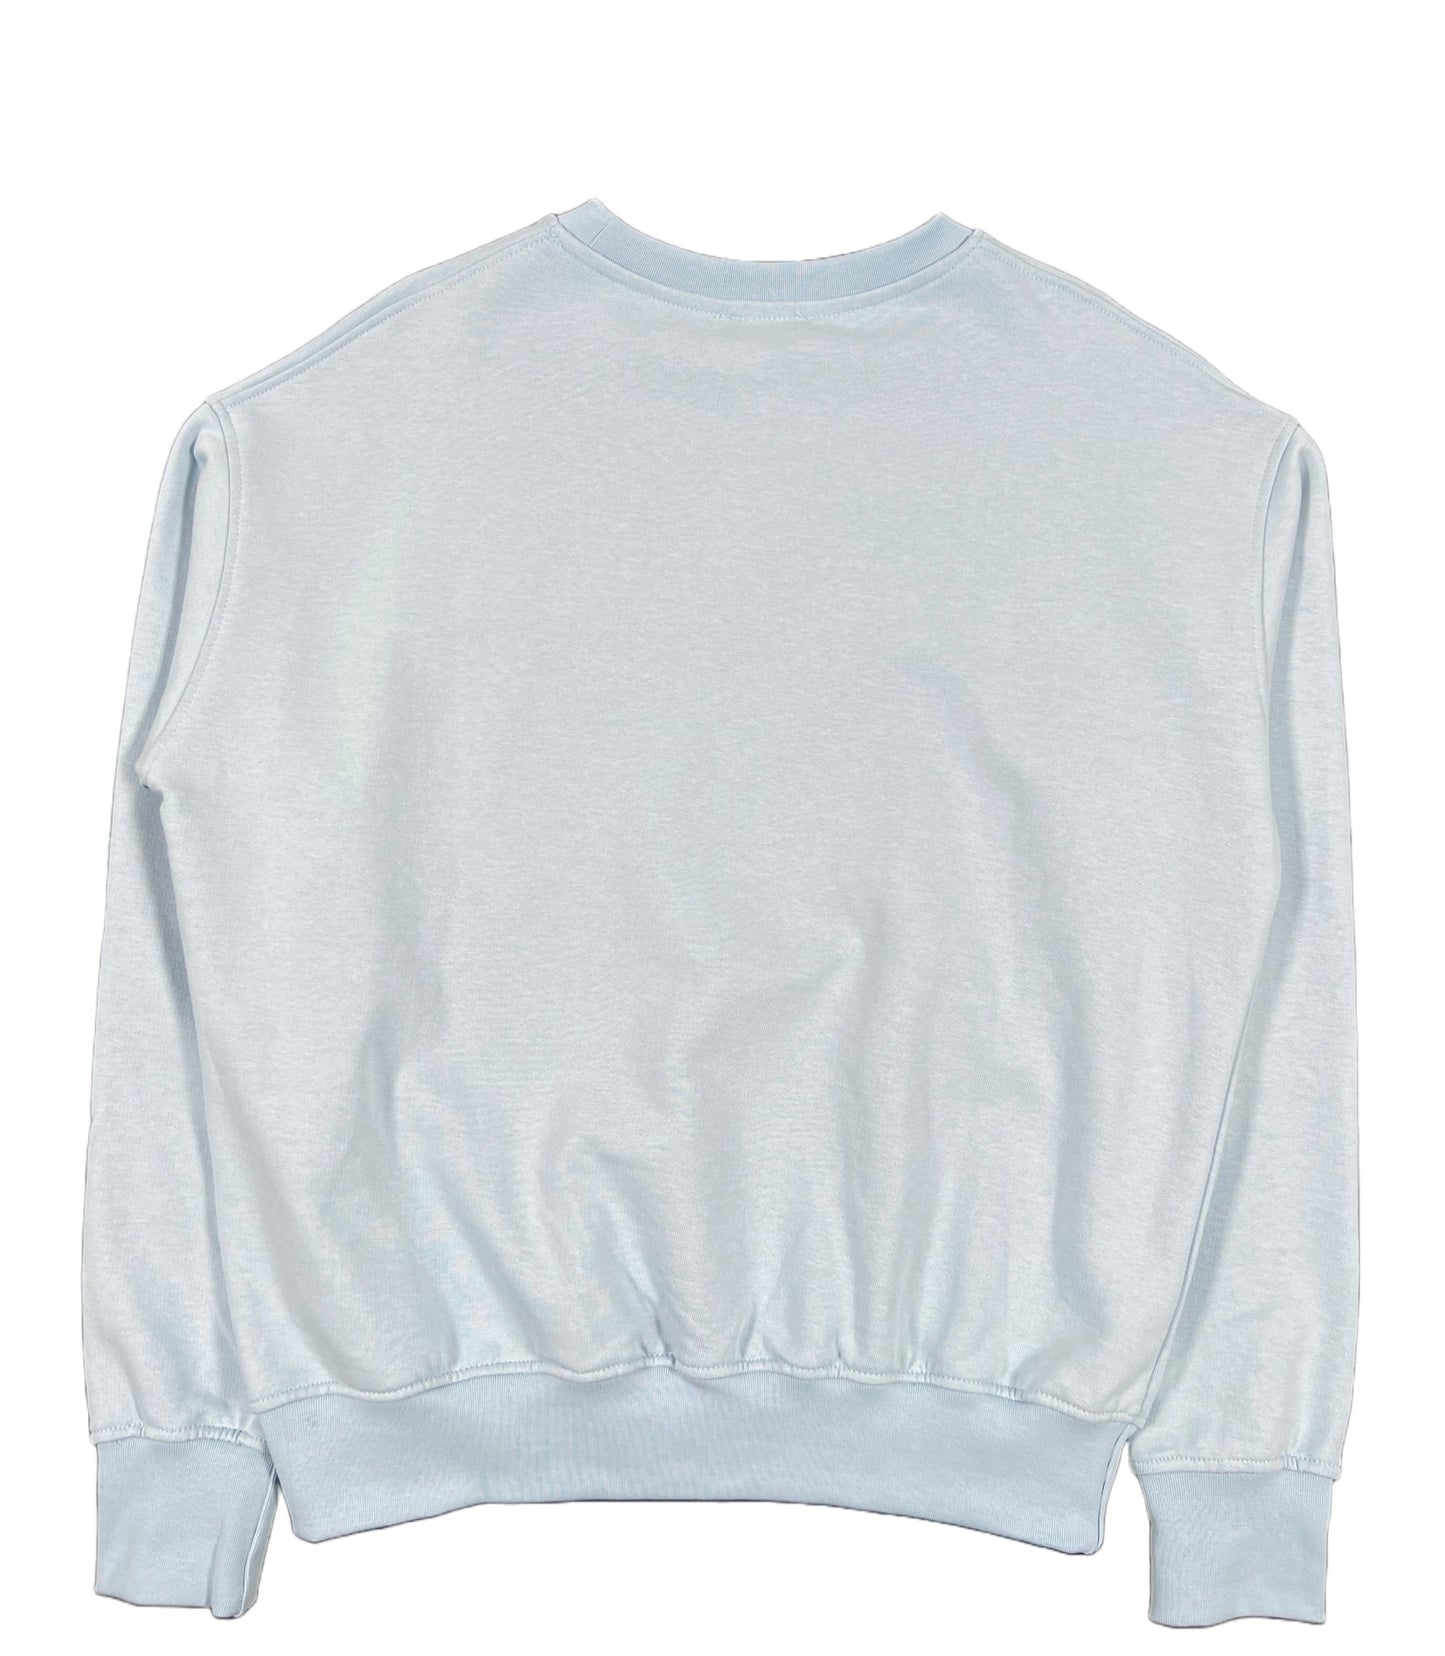 Probus FAMILY FIRST SS2307 CREWNECK BUGS LIGHT BLUE S